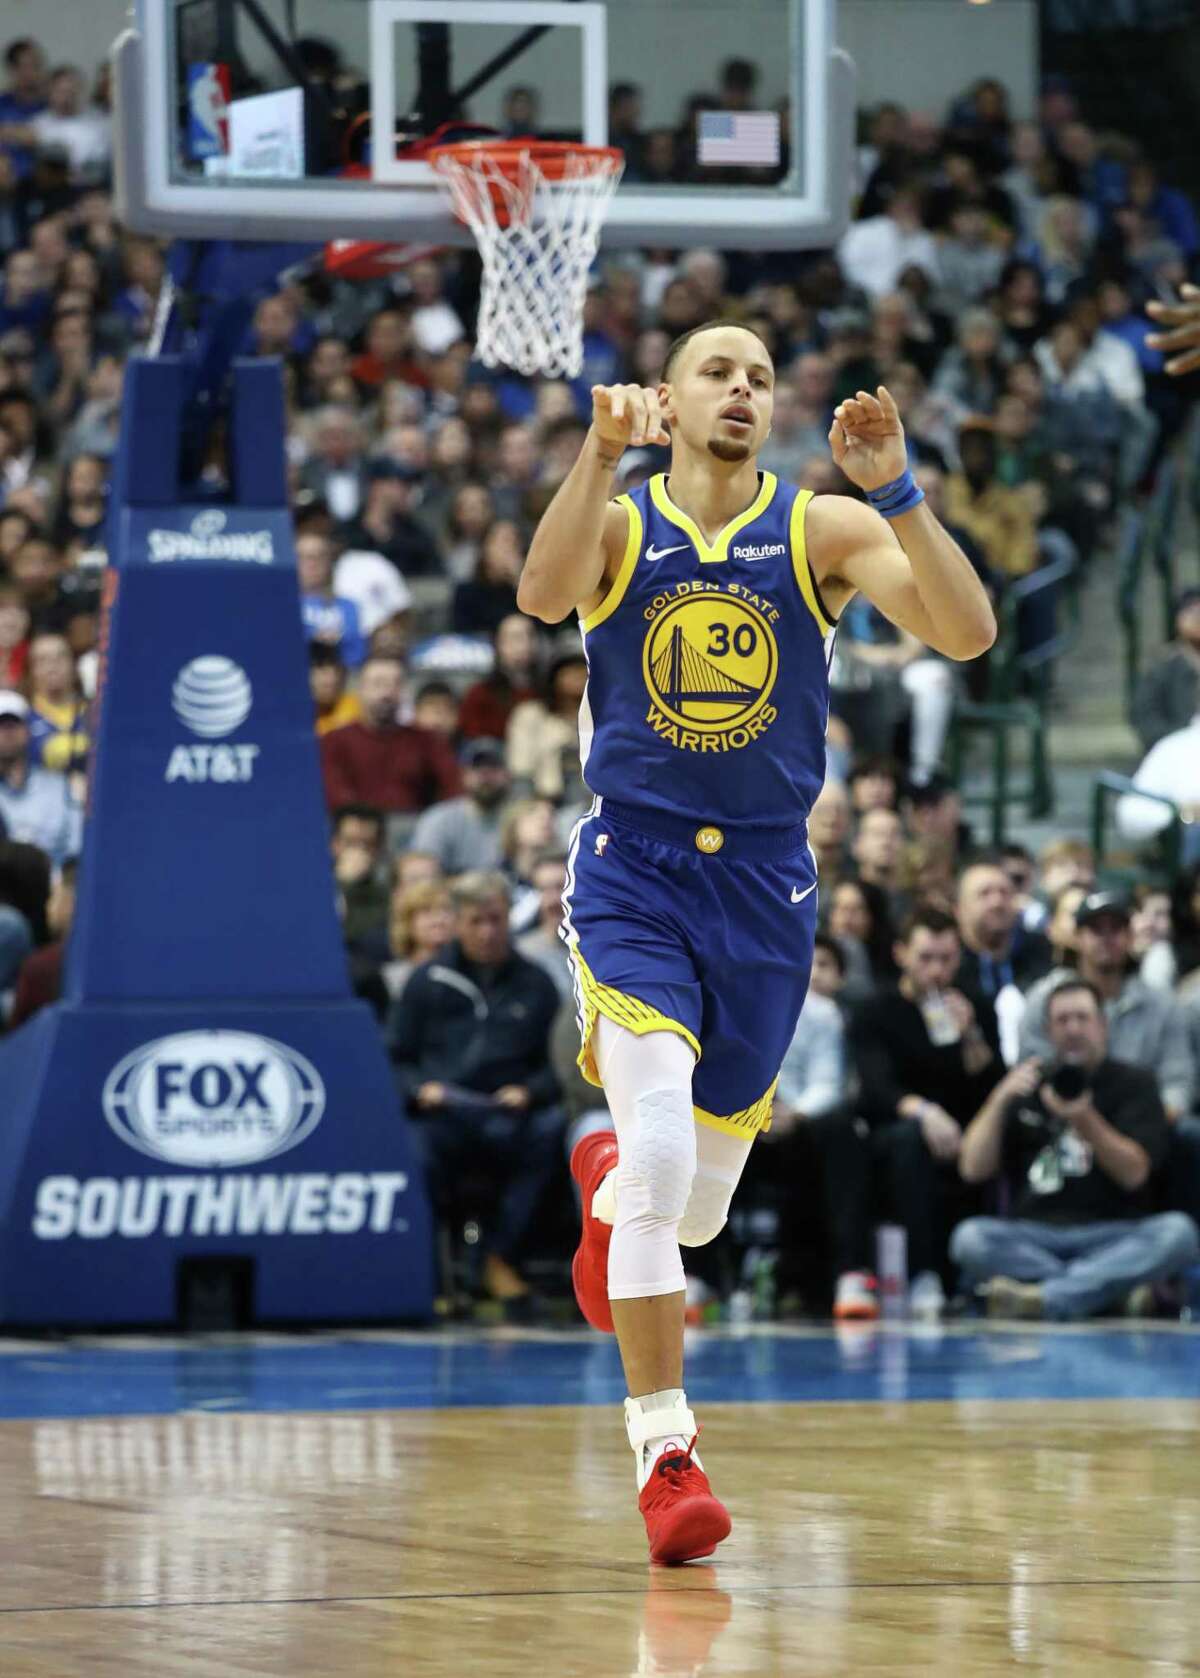 DALLAS, TEXAS - JANUARY 13: Stephen Curry #30 of the Golden State Warriors reacts during play against the Dallas Mavericks at American Airlines Center on January 13, 2019 in Dallas, Texas. NOTE TO USER: User expressly acknowledges and agrees that, by downloading and or using this photograph, User is consenting to the terms and conditions of the Getty Images License Agreement. (Photo by Ronald Martinez/Getty Images)